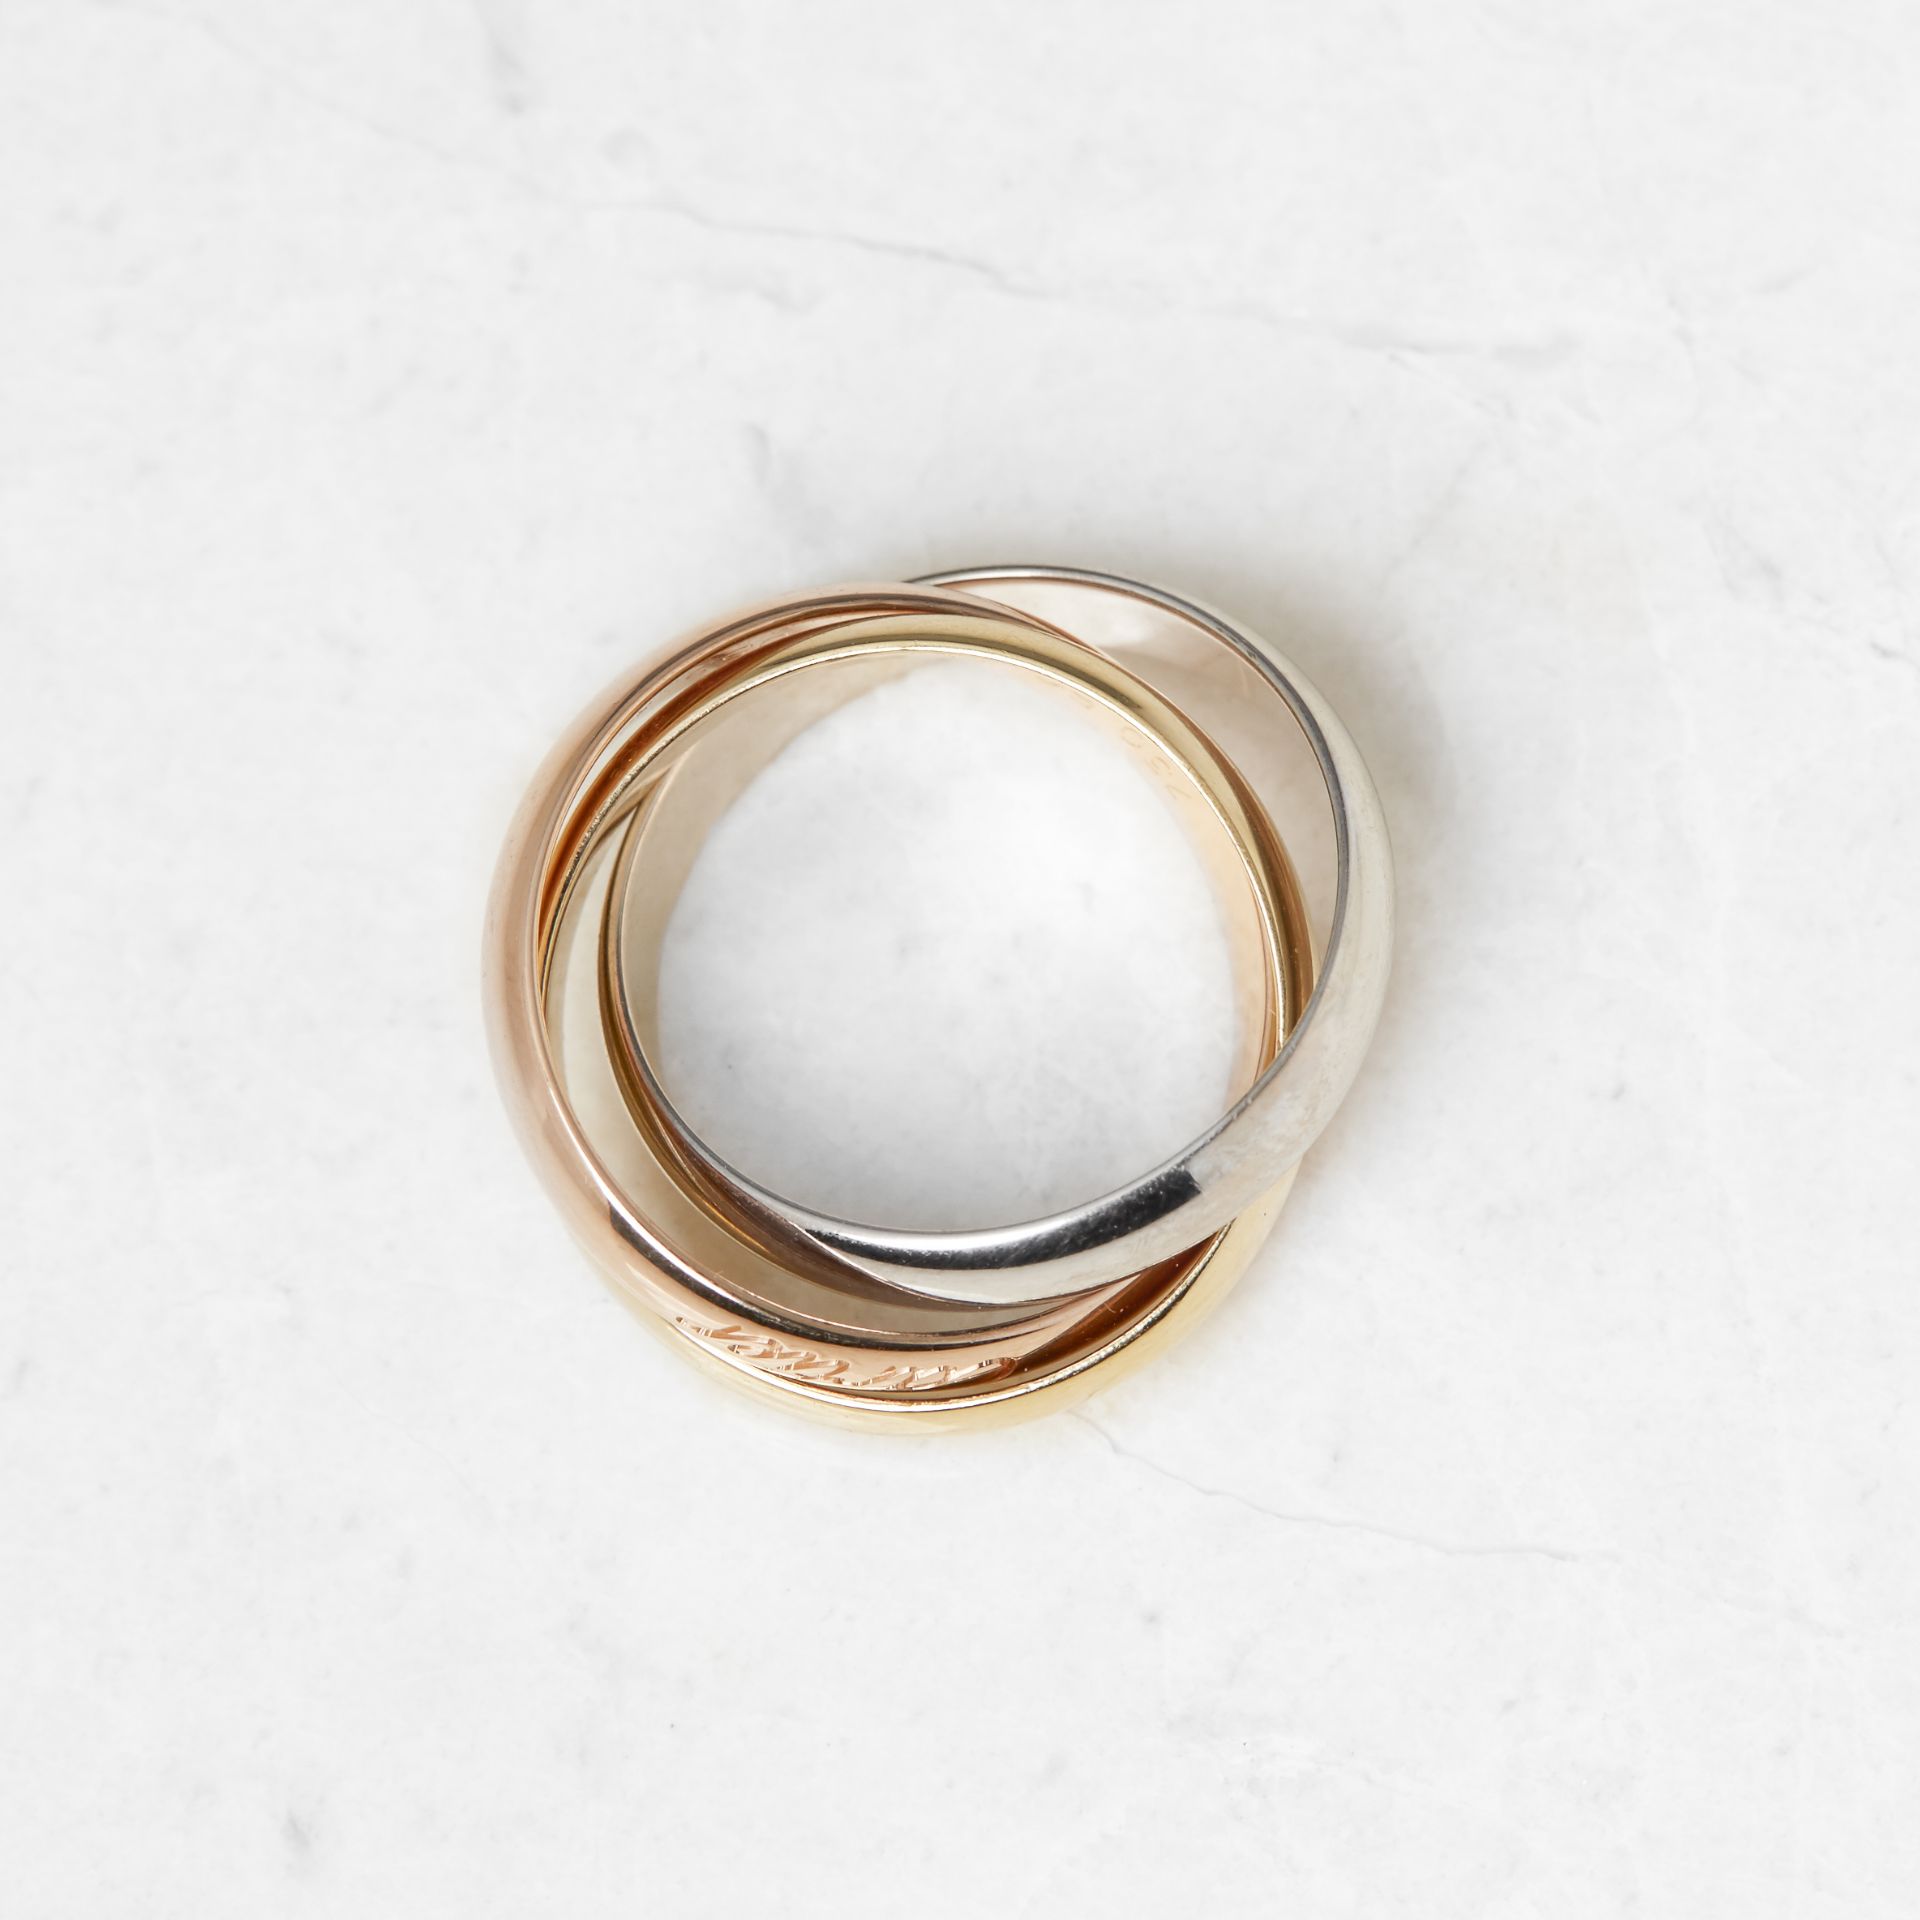 Cartier 18k Yellow, White & Rose Gold Trinity Ring - Image 10 of 17